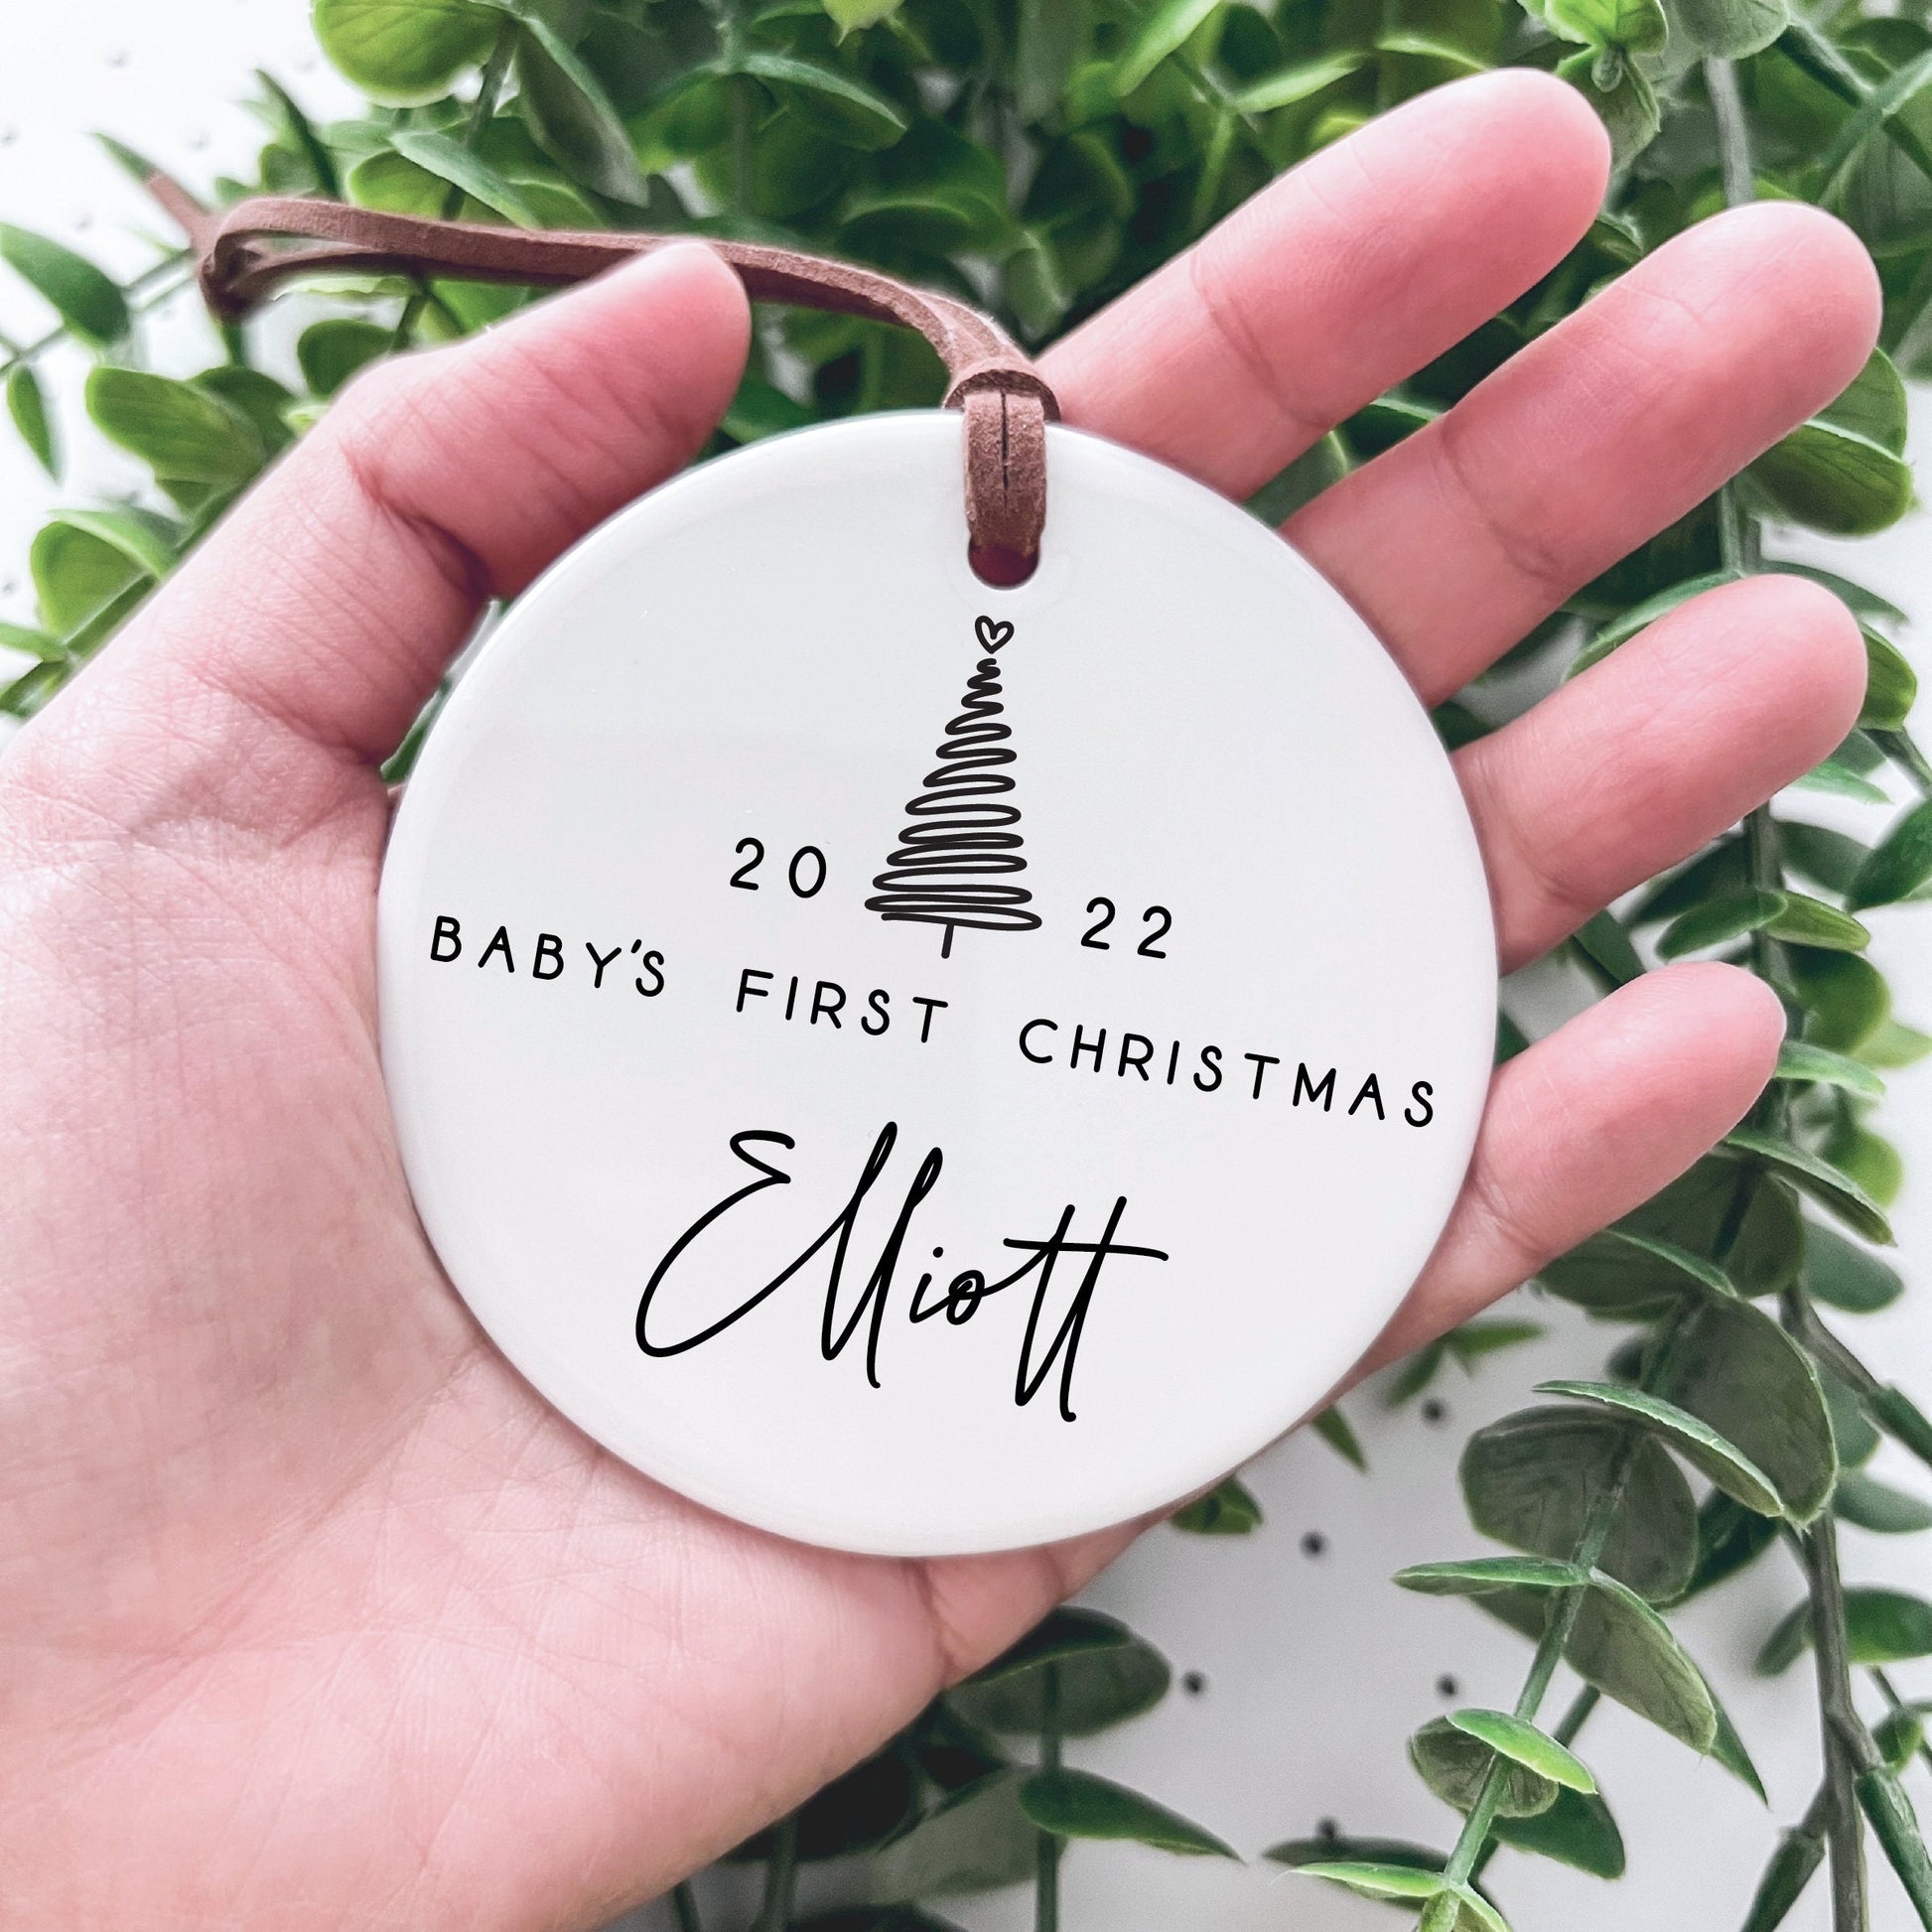 Baby's First Christmas Ornament / Ceramic Porcelain Ornament / Baby Birth Stats / Personalized Newborn Ornament / Gift for New Parents